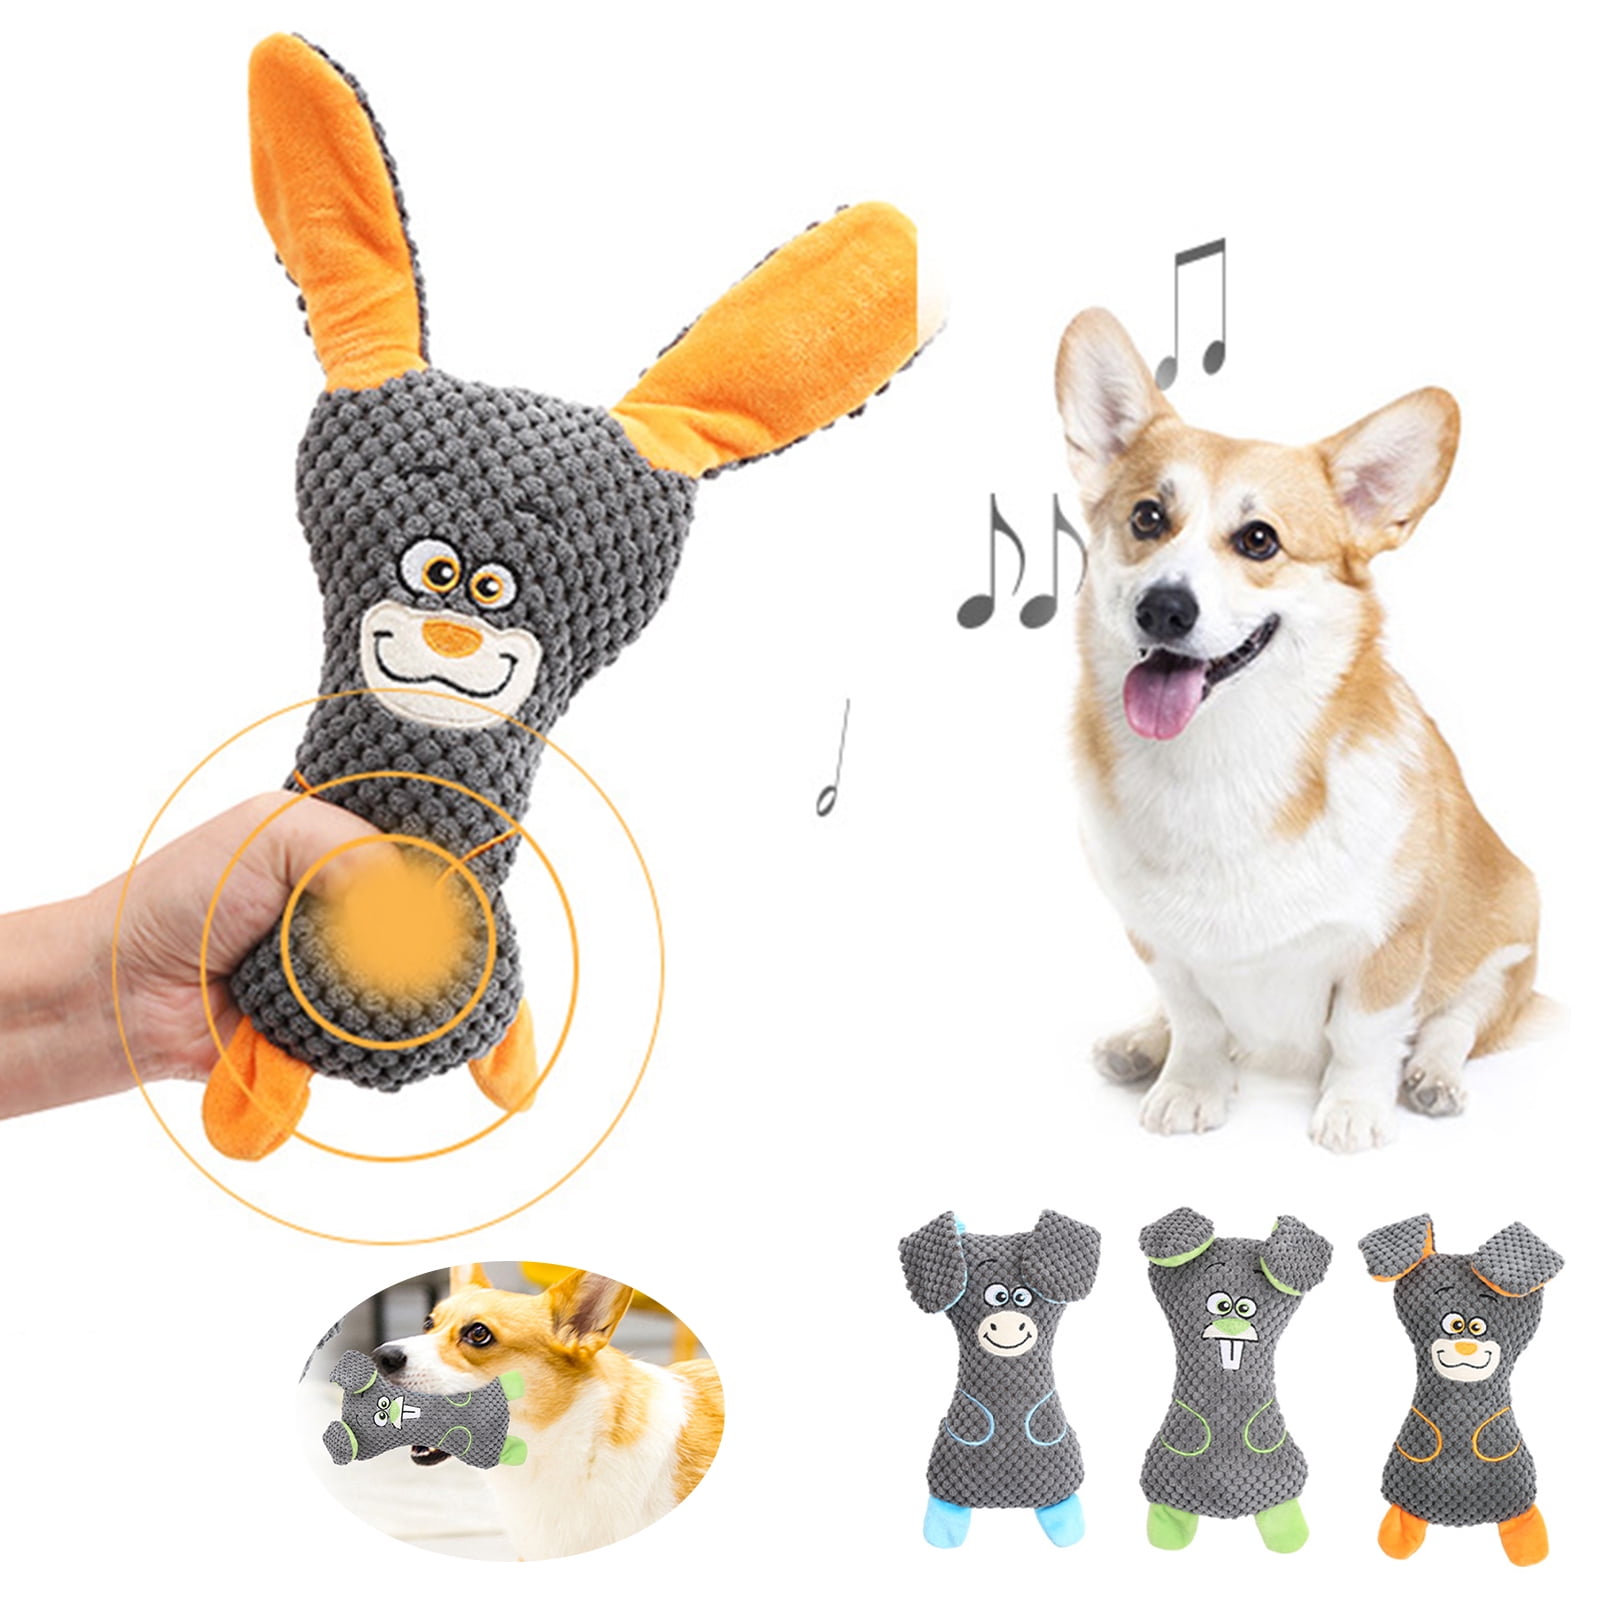 Ybeauty Dog Toy with Sound Effect Bite Resistant Interactive Toy Pet Plush  Squeak Chew Toy Pet Supplies 